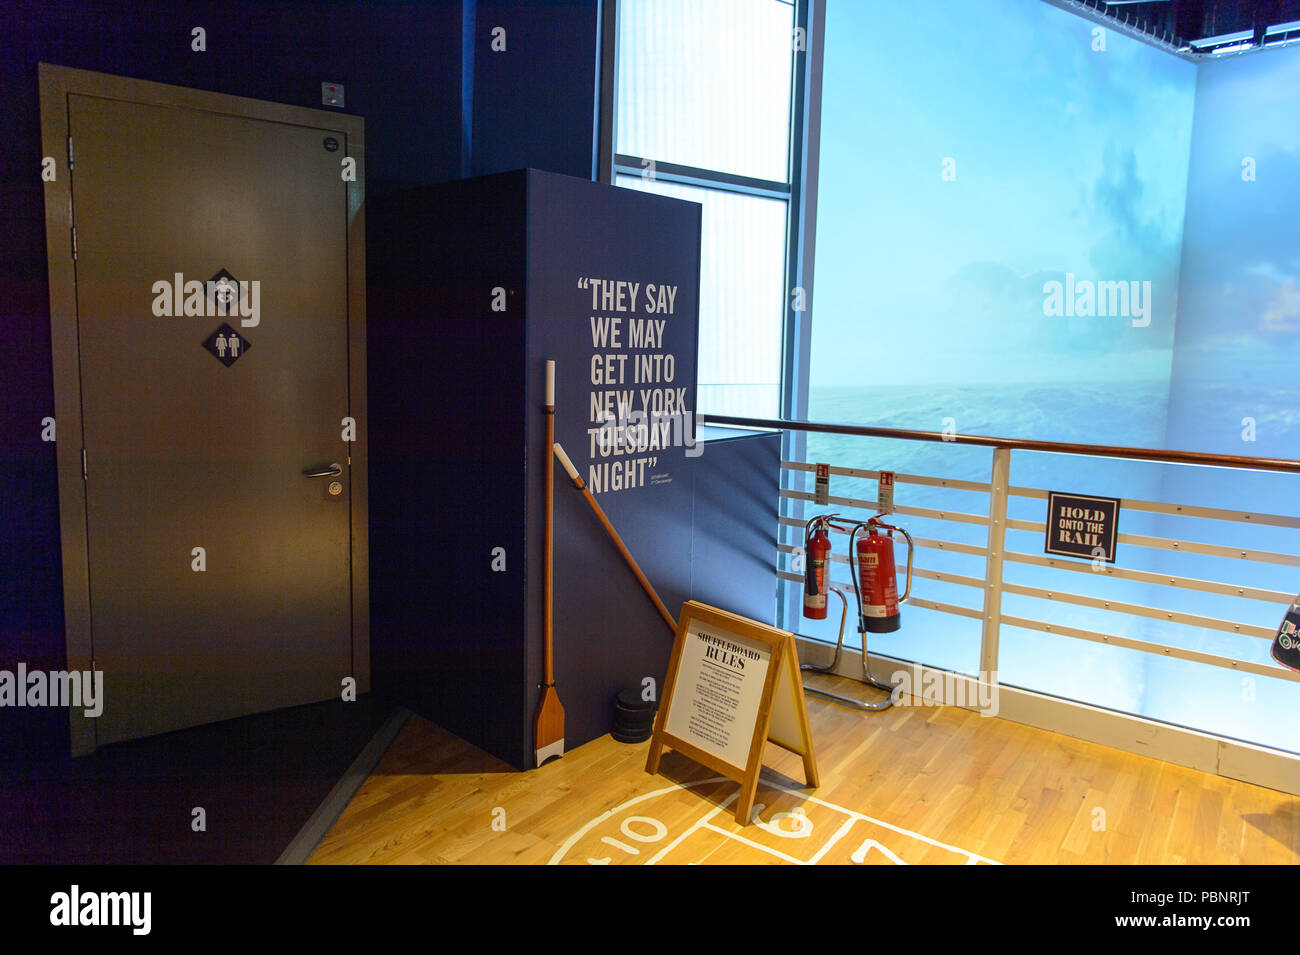 BELFAST, NI - JULY 14, 2016: Interior of the Titanic Belfast, visitor attraction dedicated to the RMS Tinanic, a ship whic sank by hitting an iceberg  Stock Photo